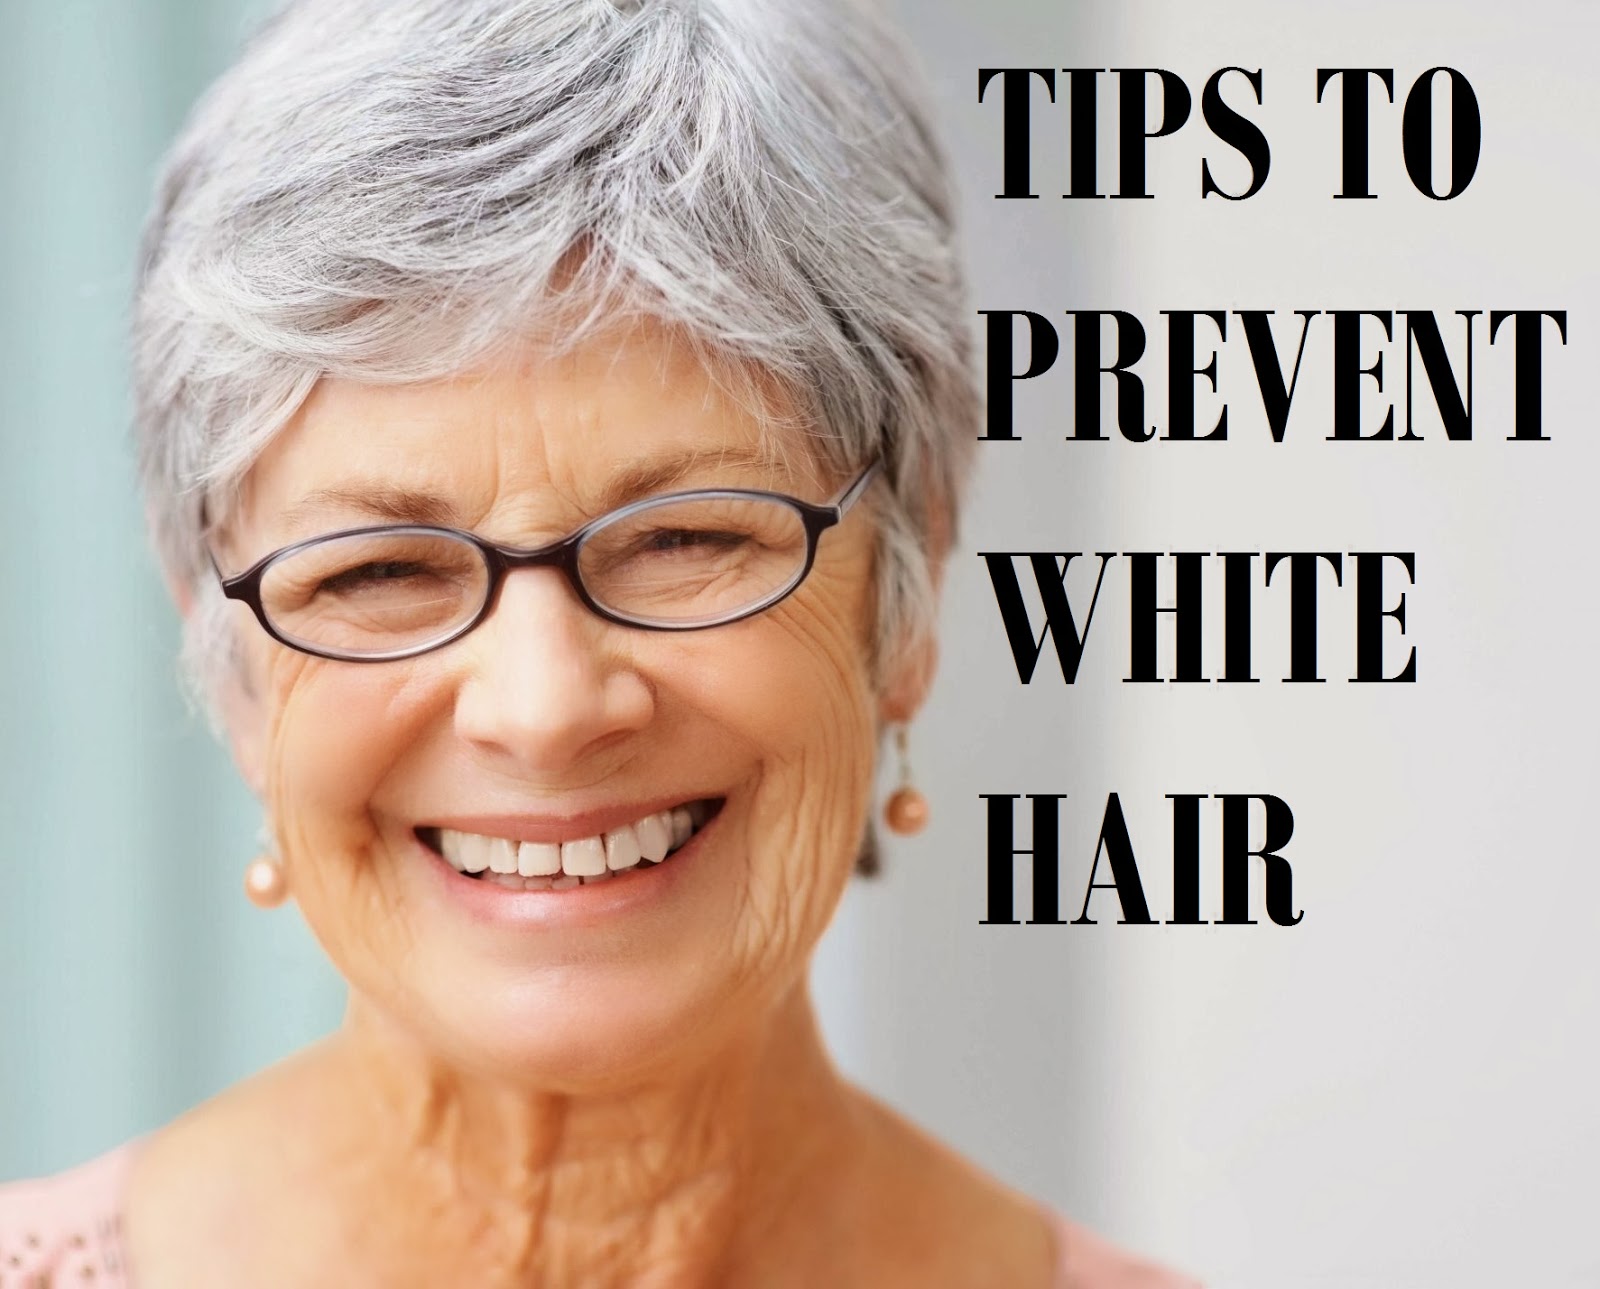 TIPS TO PREVENT WHITE HAIR TipsClinic